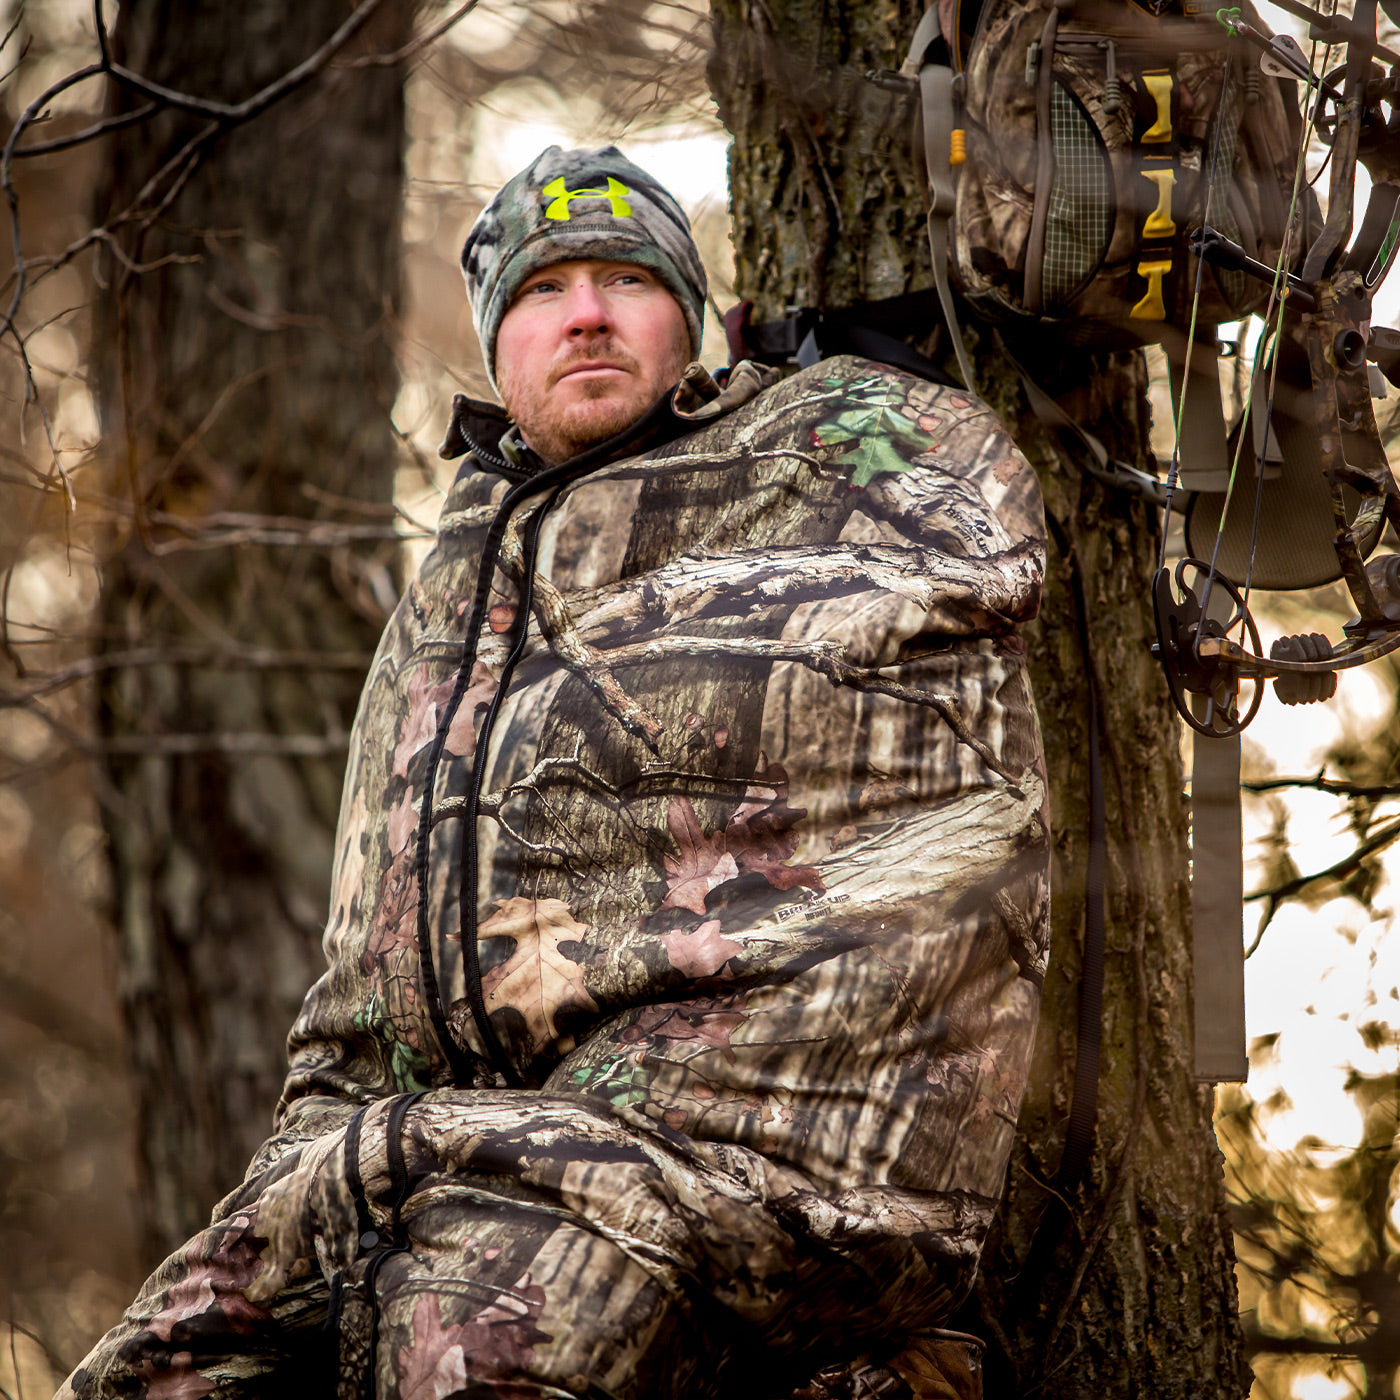 6 Essential Pieces of Hunting Gear for Beginners